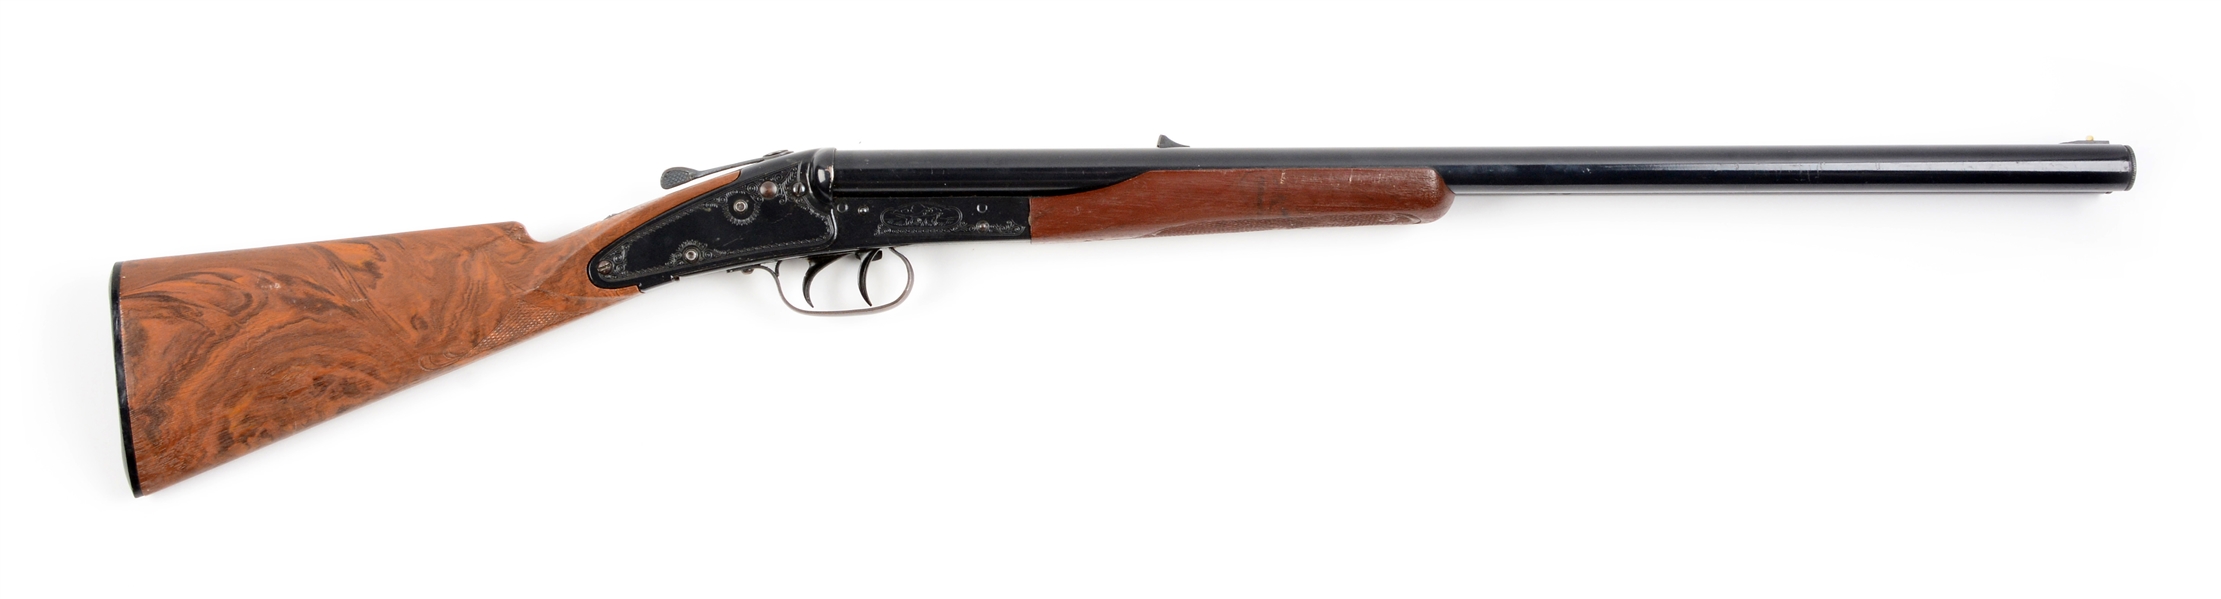 DAISY MODEL 21 SEARS SIDE BY SIDE AIR RIFLE.